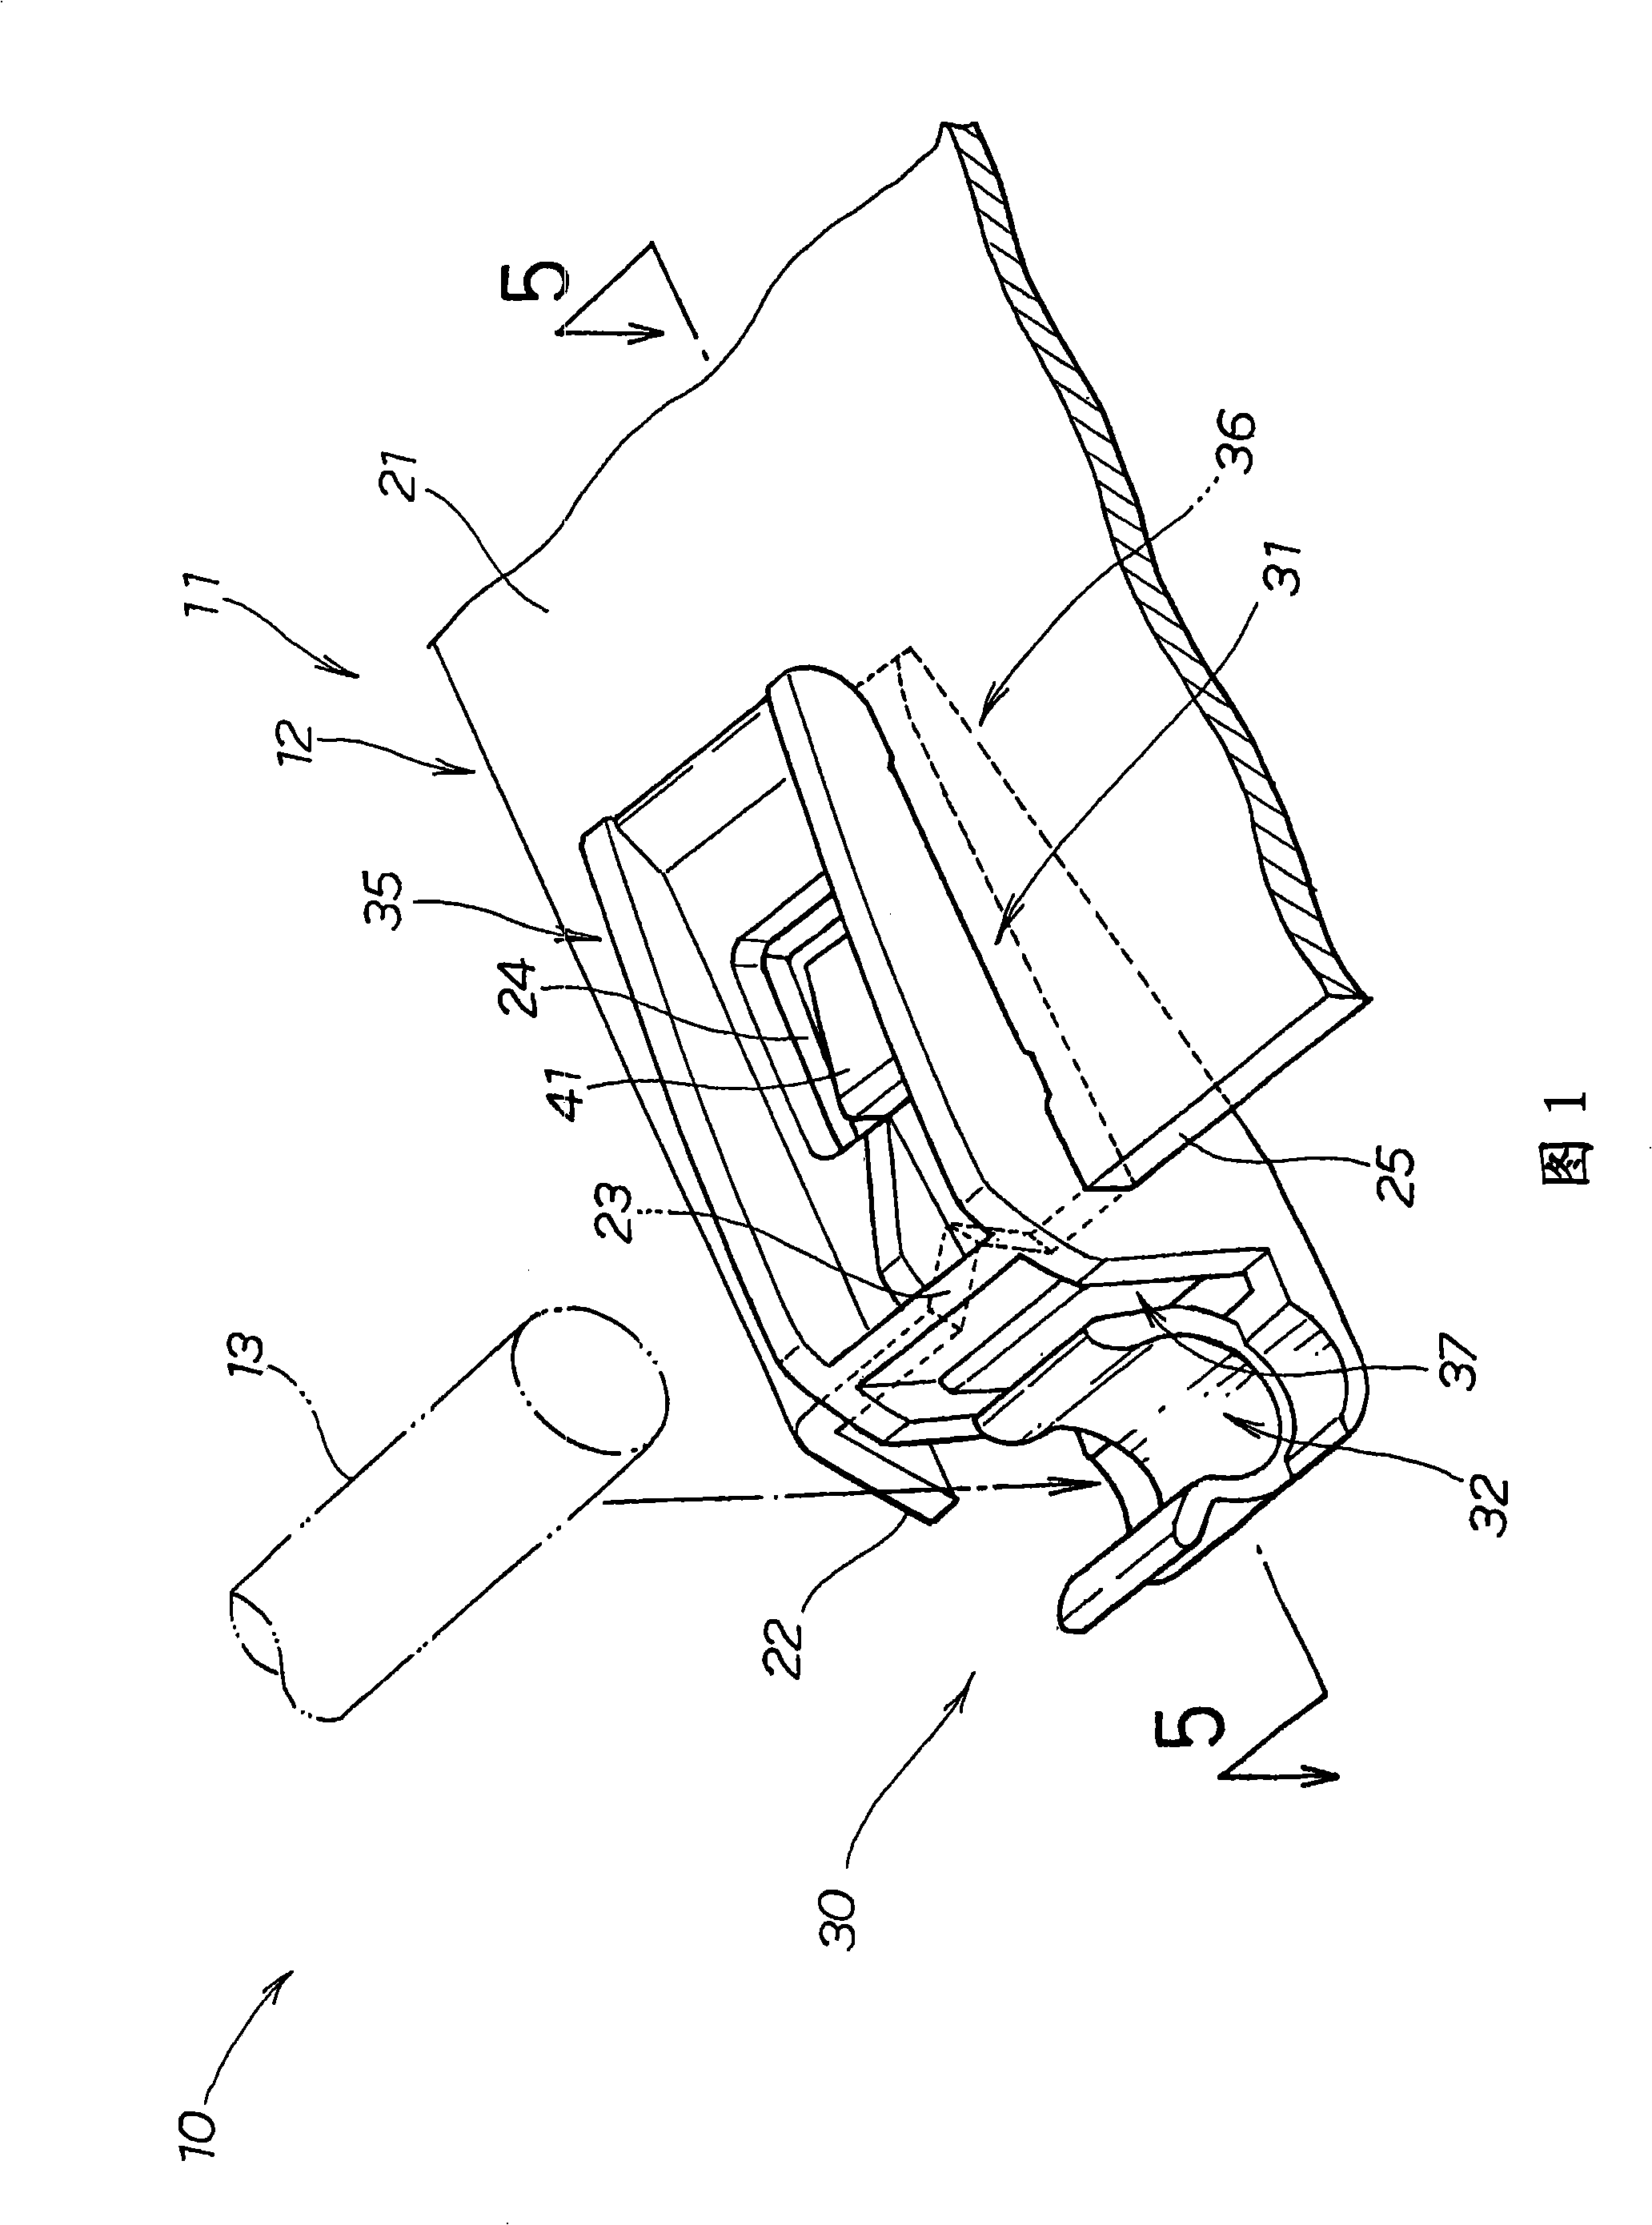 Mounting structure of pedestal for cover opening prop